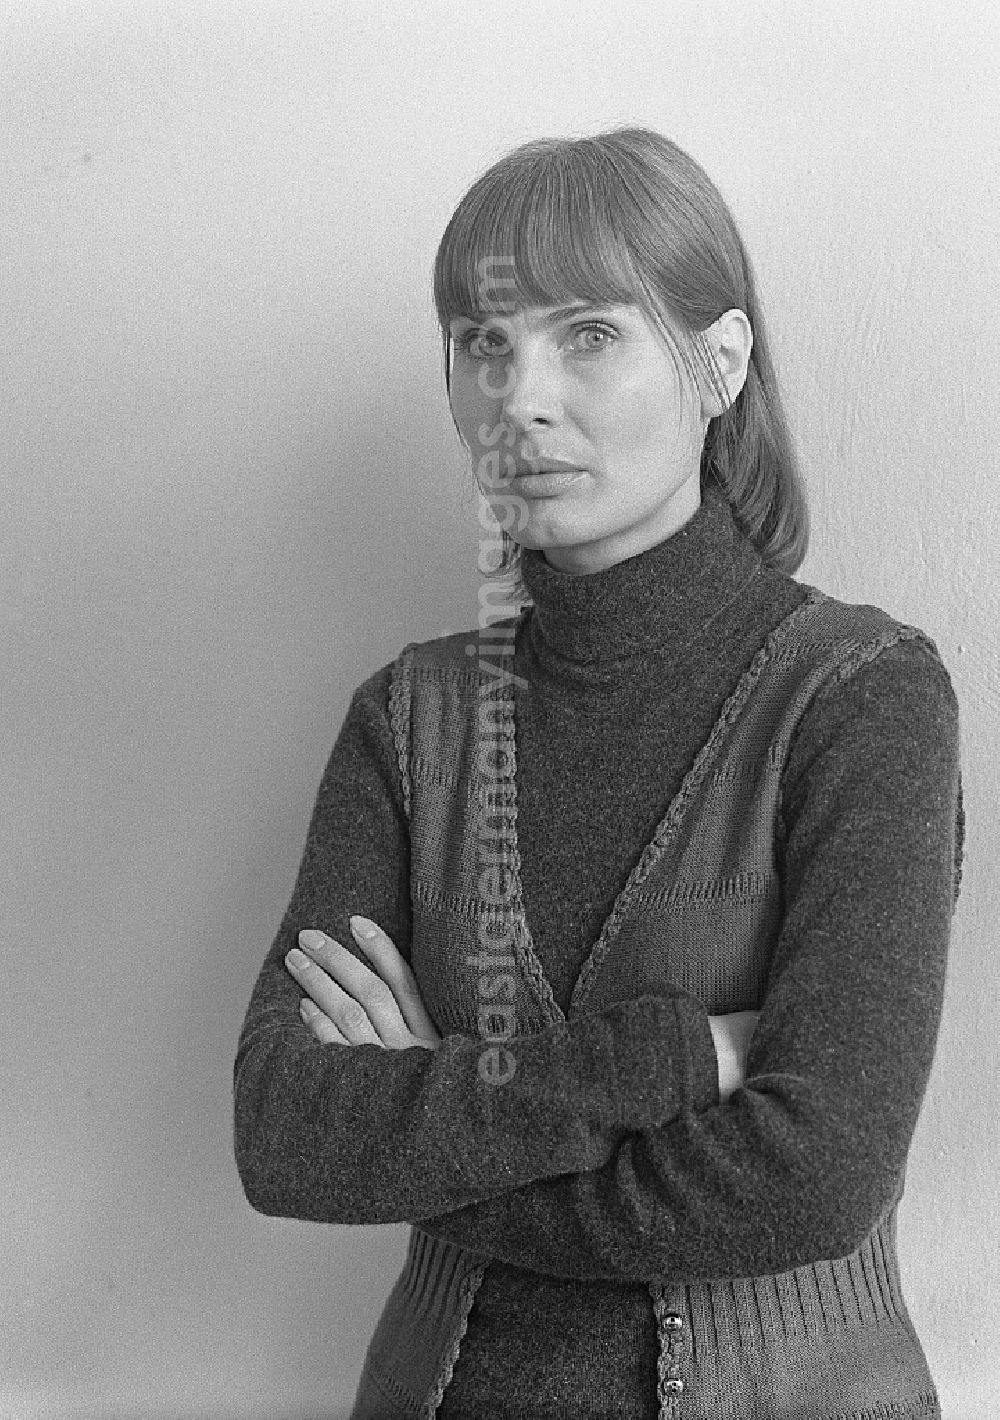 GDR photo archive: Berlin - Graphic designers, painters and artists Heidrun Hegewald in the district Prenzlauer Berg in Berlin Eastberlin on the territory of the former GDR, German Democratic Republic